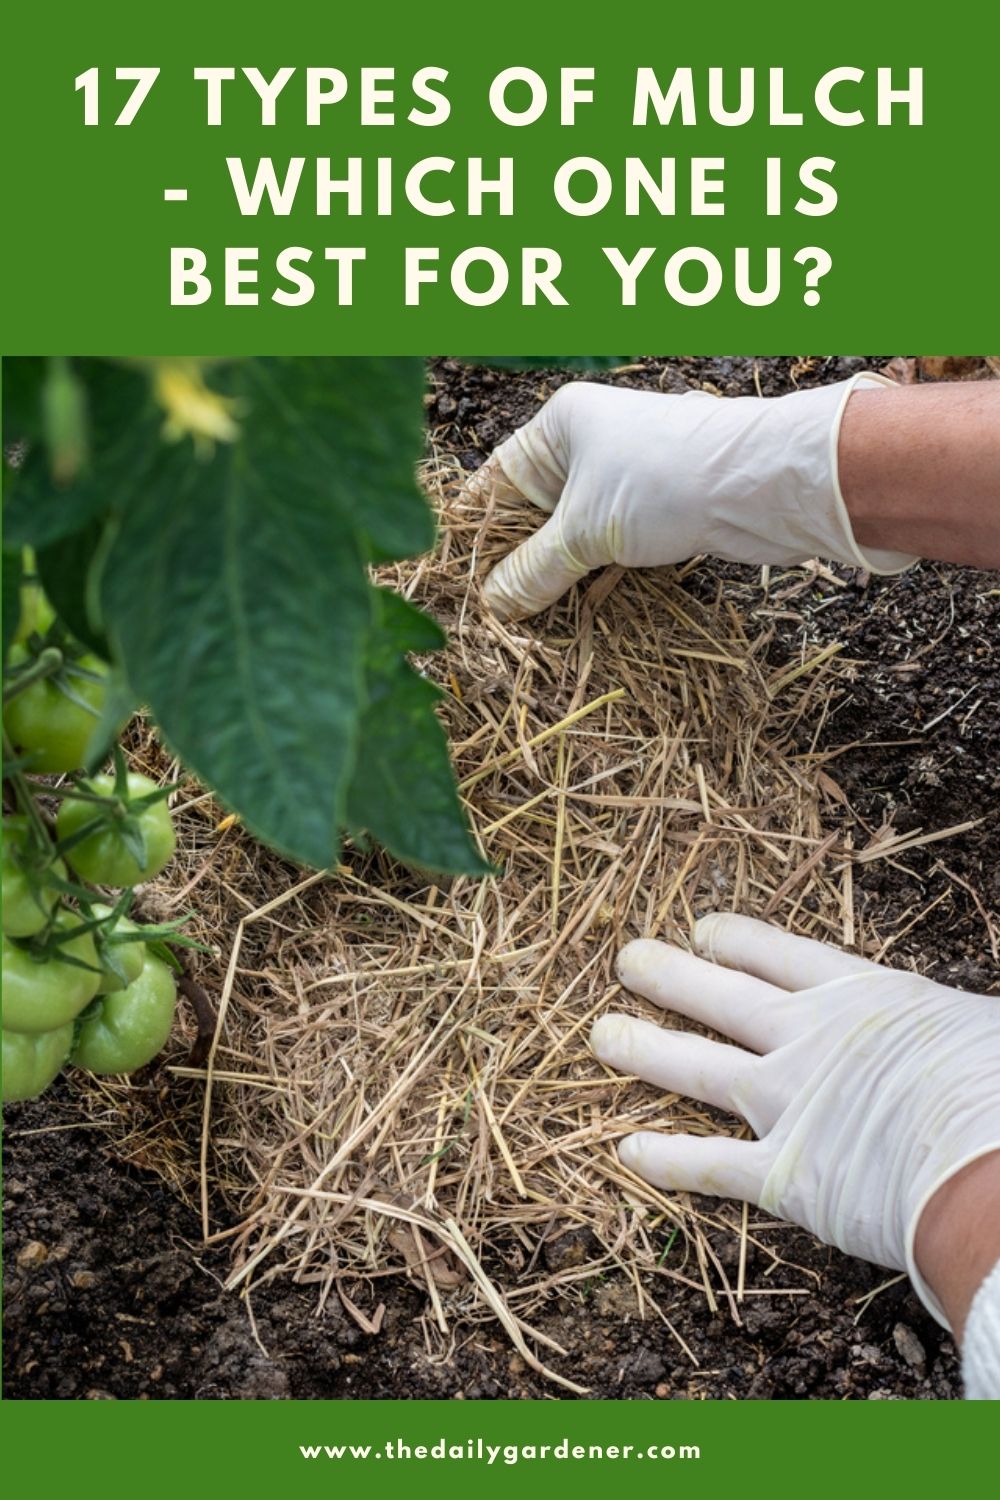 17 Types of Mulch - Which One is Best for You 1